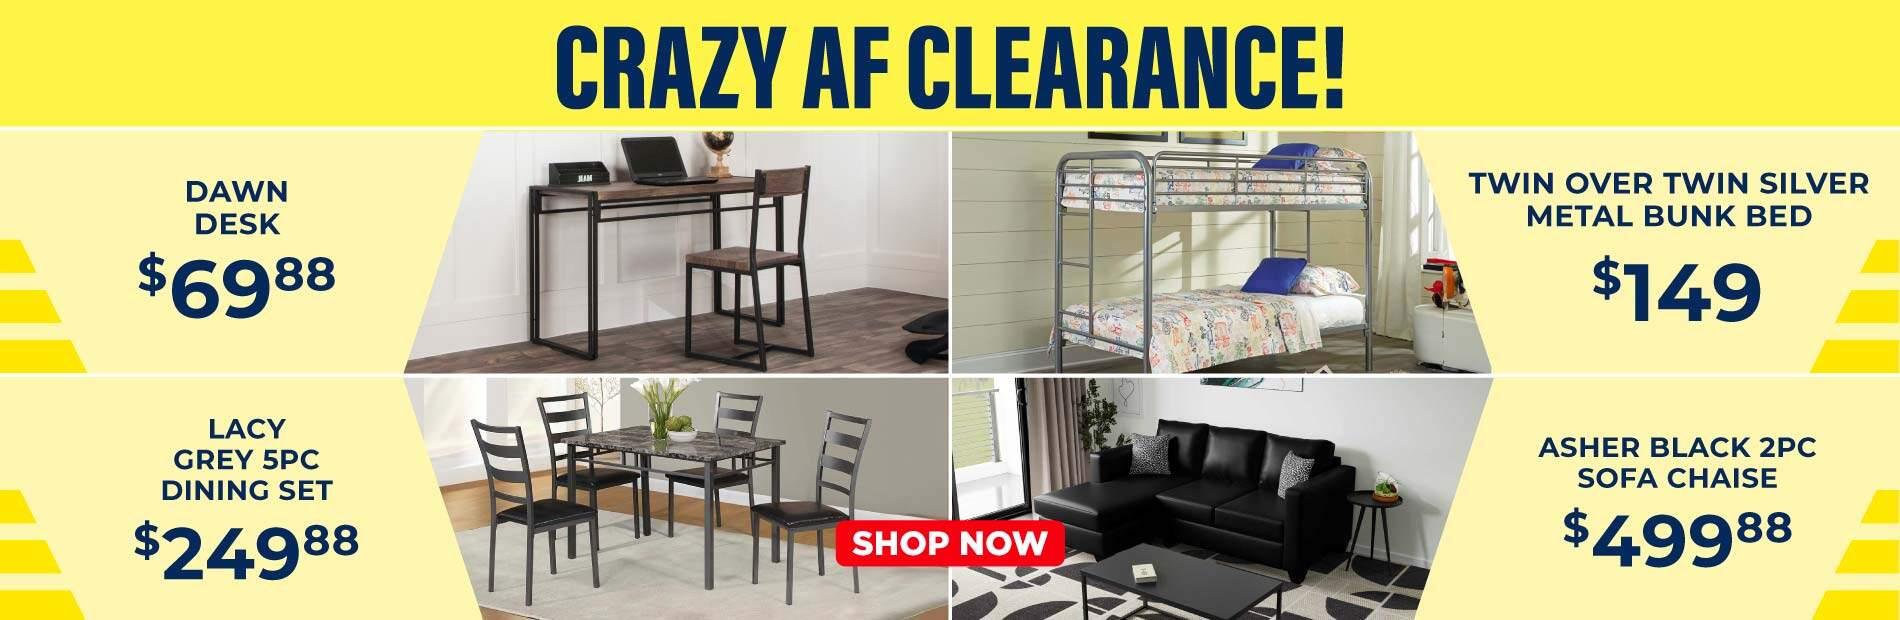 Crazy AF Clearance! Dean Desk $69.88, Twin over Twin Silver Metal Bunk Bed $149,Lacy Grey 5PC Dining Set 249.88, Asher Black 2PC Sofa Chaise 499.88. Shop now!